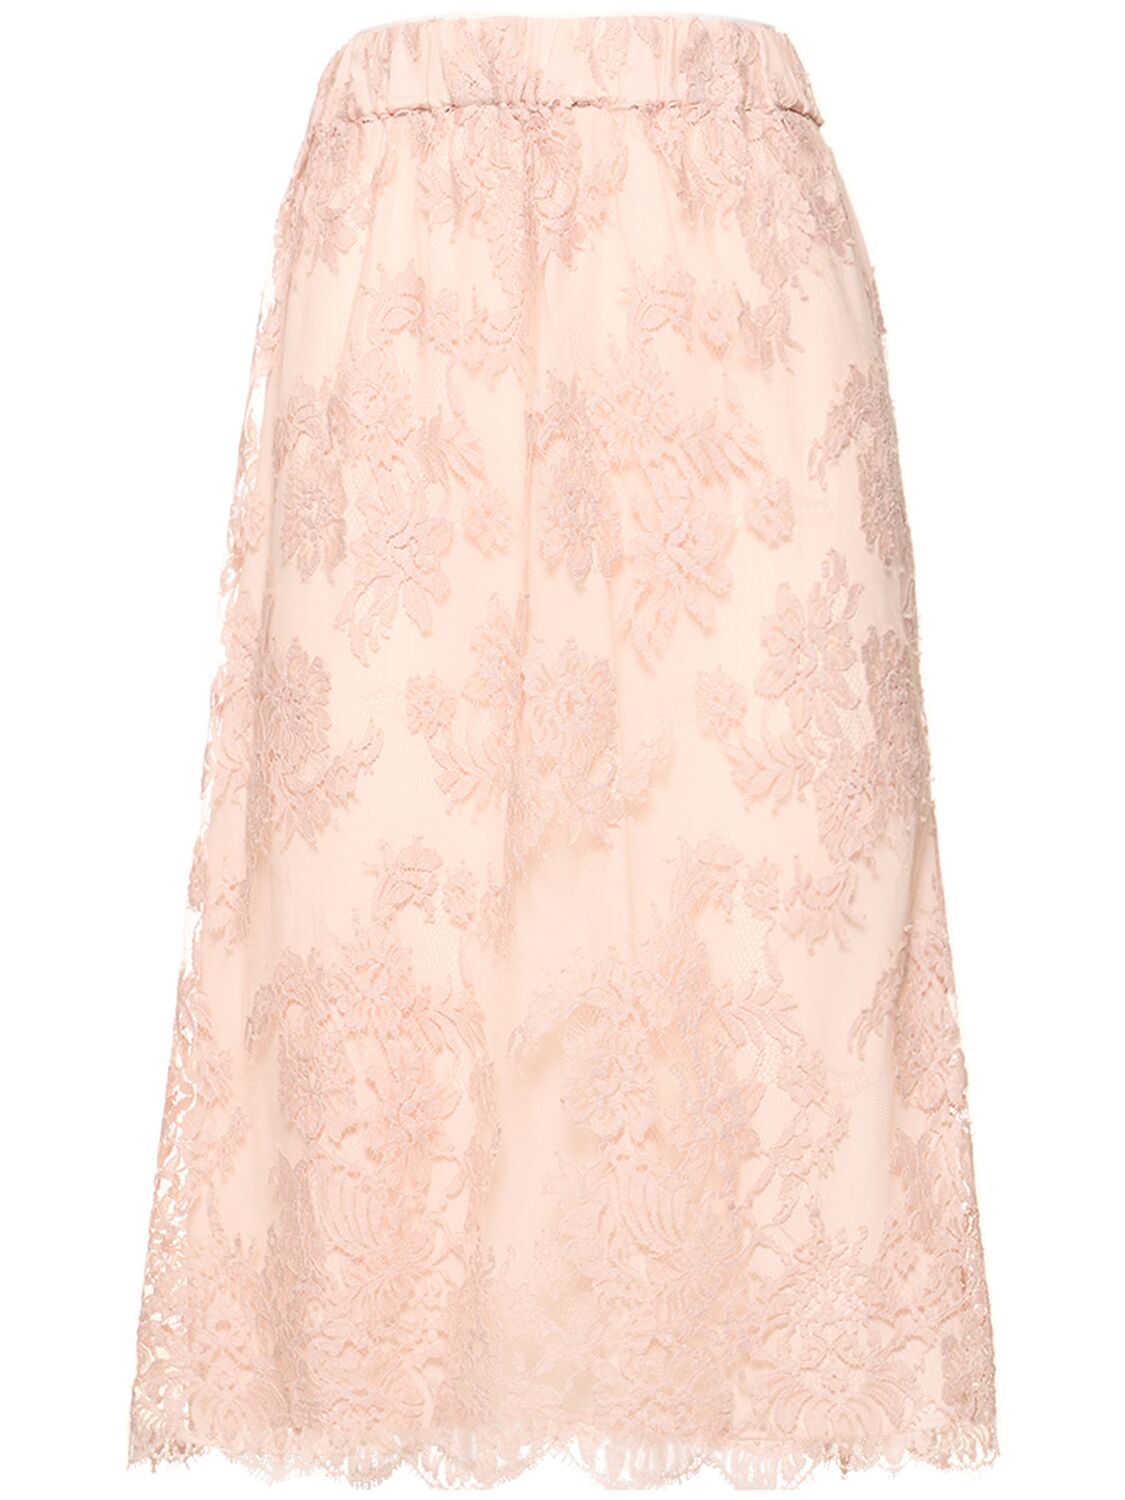 Image of Cotton Blend Lace Skirt